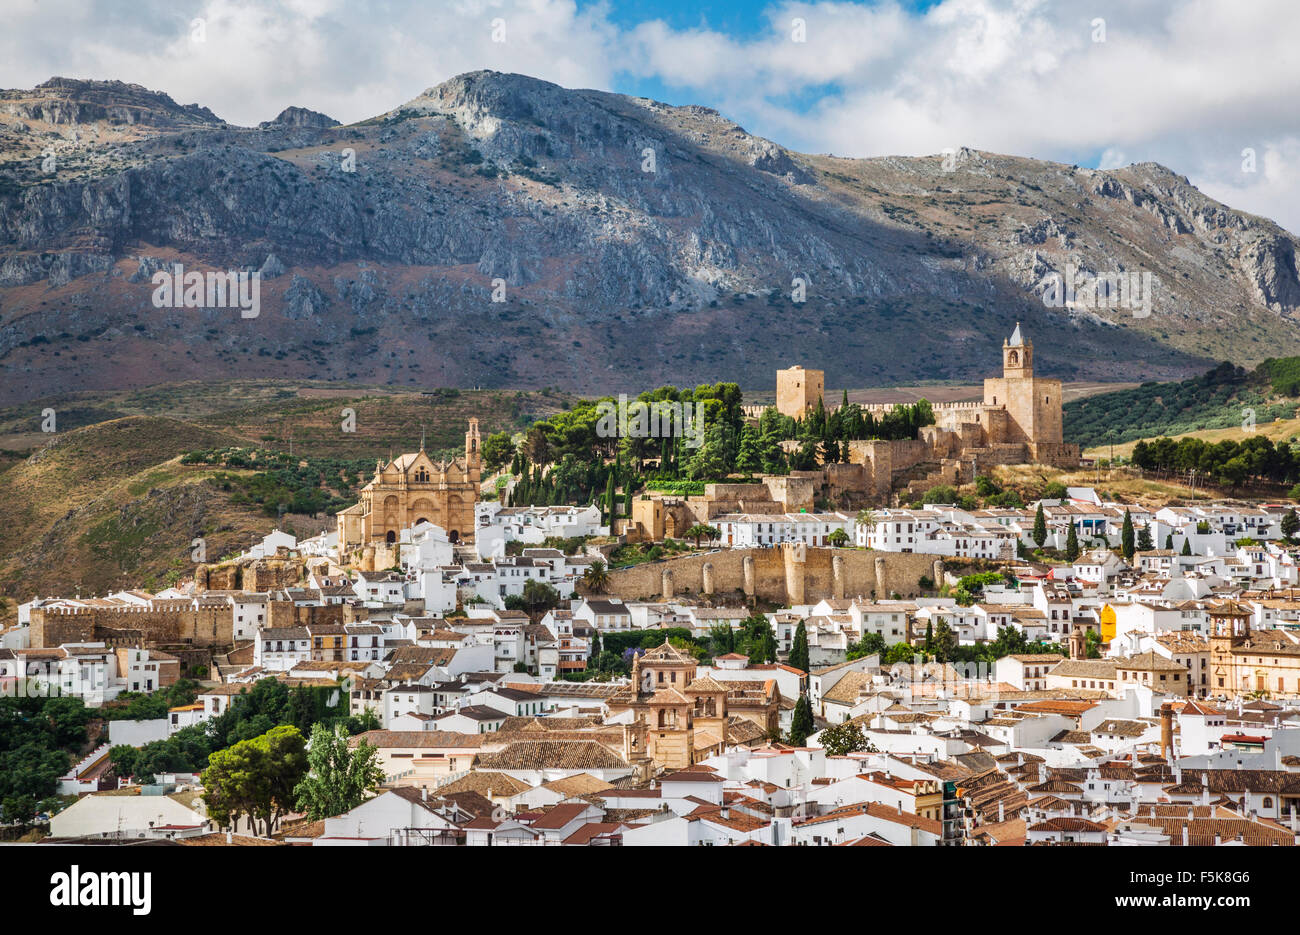 Spain, Andalusia, Province of Malaga, view of Antequera with Royal Colegiate Church and the Alcazaba de Antequera Stock Photo